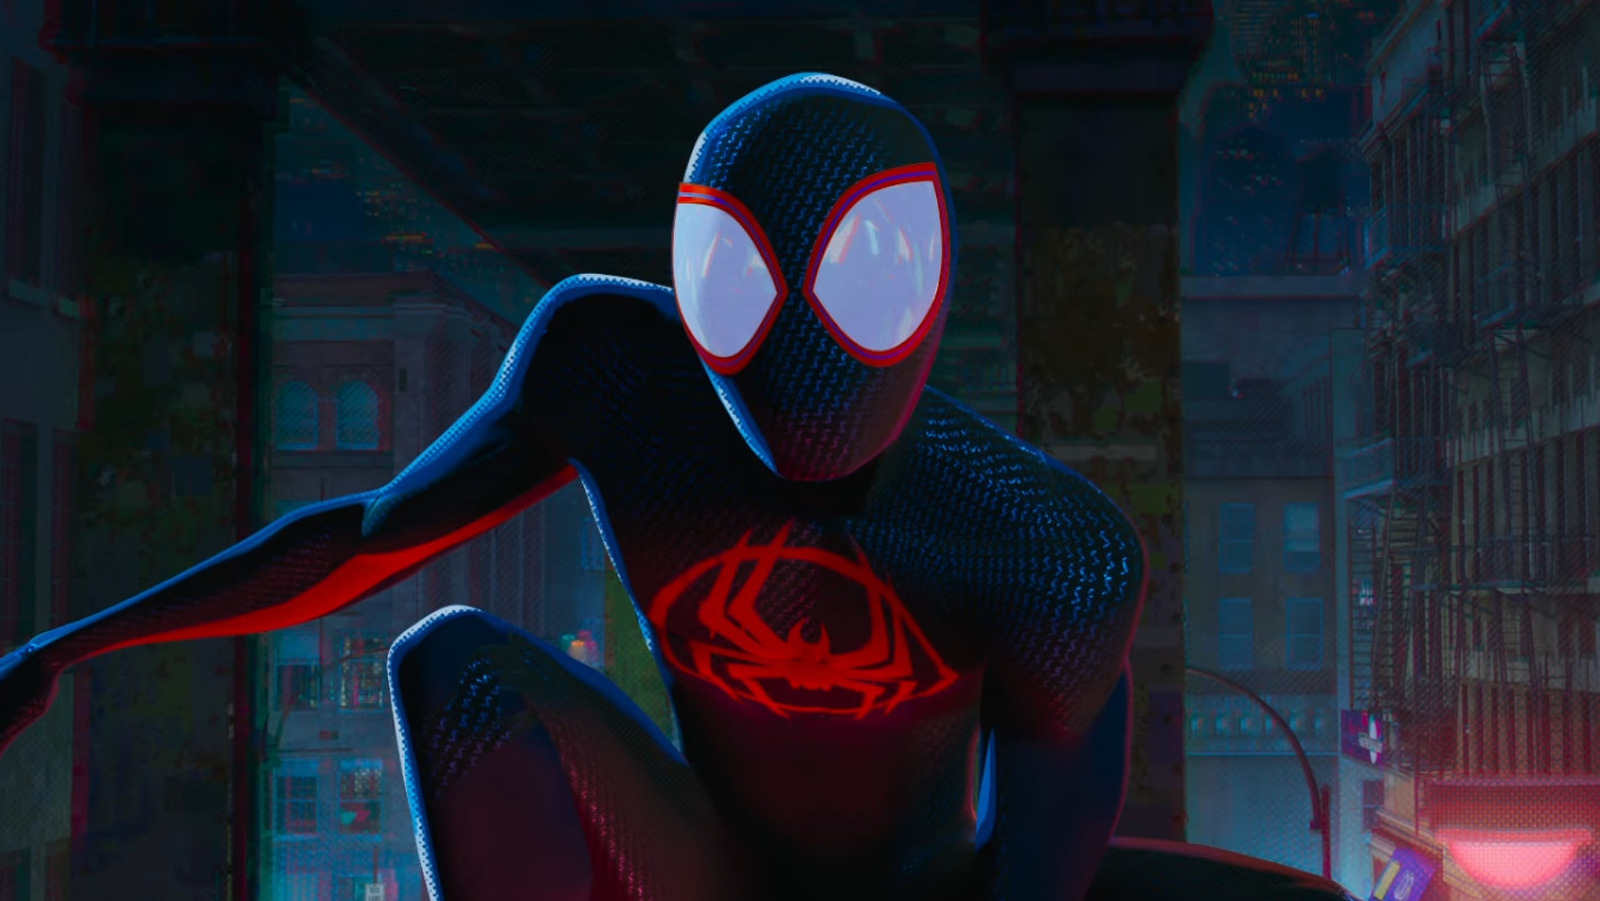 Here's Streaming: Spider-Man Across the Spider Verse (2023) FullMovie,  Online Free On 123movies: How To Watch 'Spider-Verse' Movie From HBO Max Or  Netflix At Home